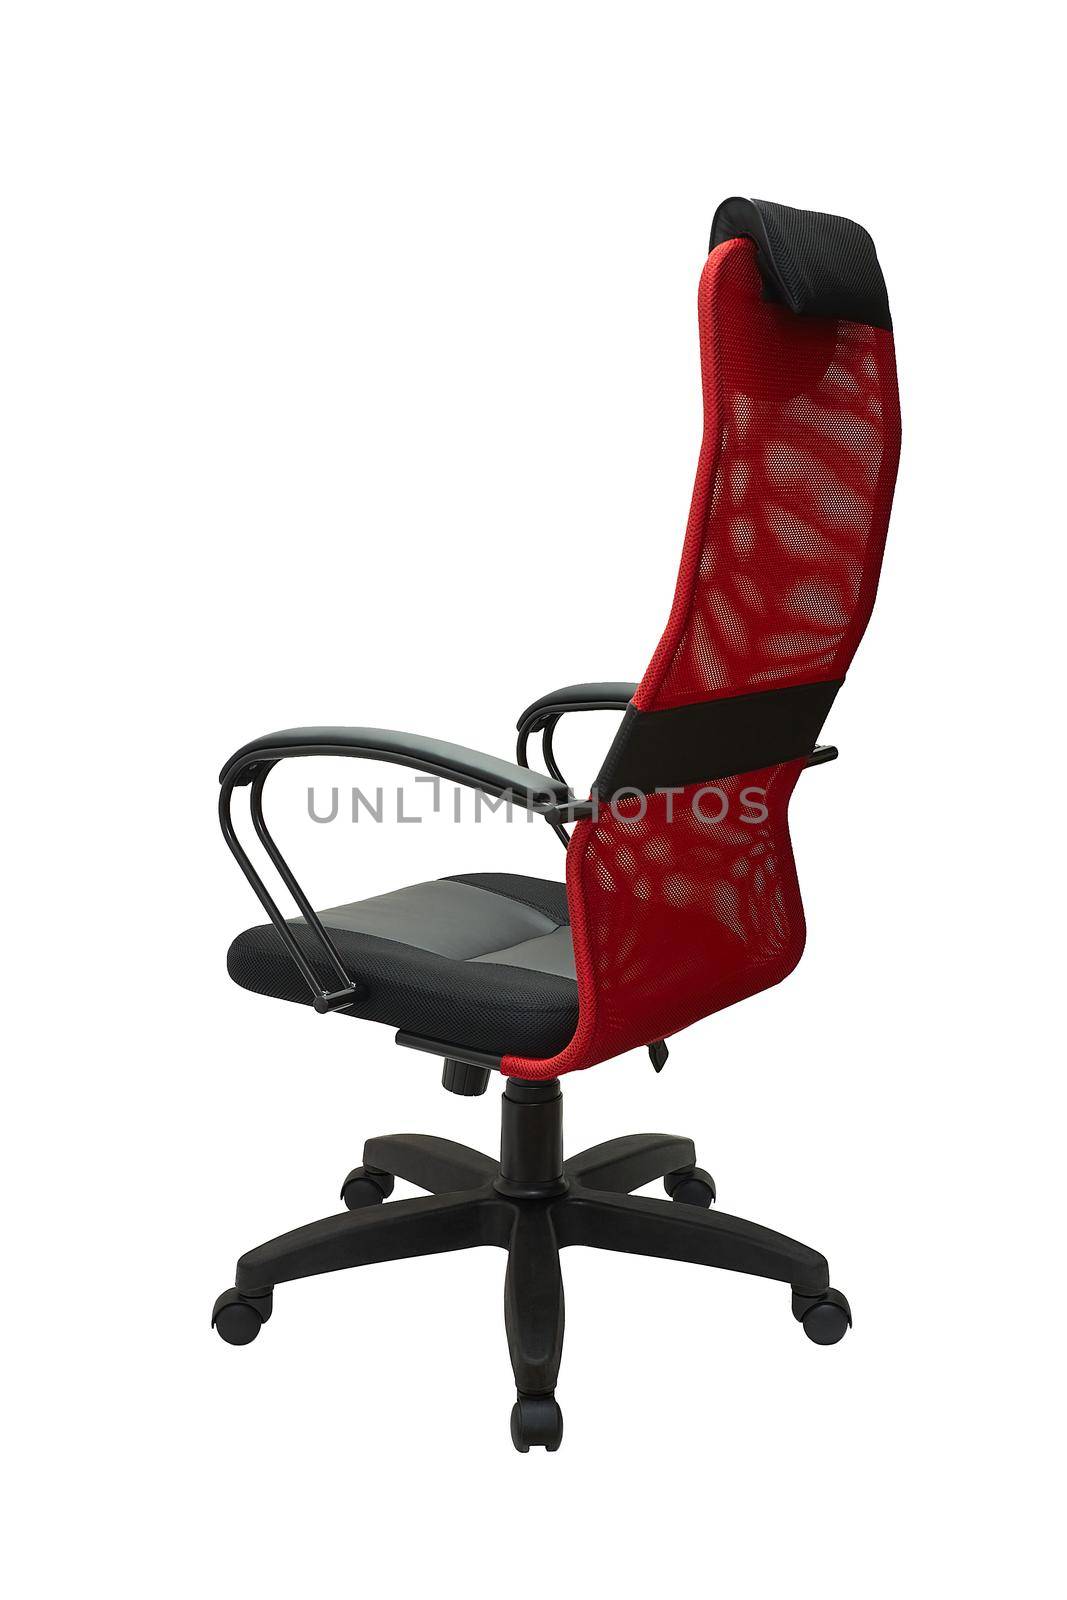 red office fabric armchair on wheels isolated on white background, back view. modern furniture, interior, home design